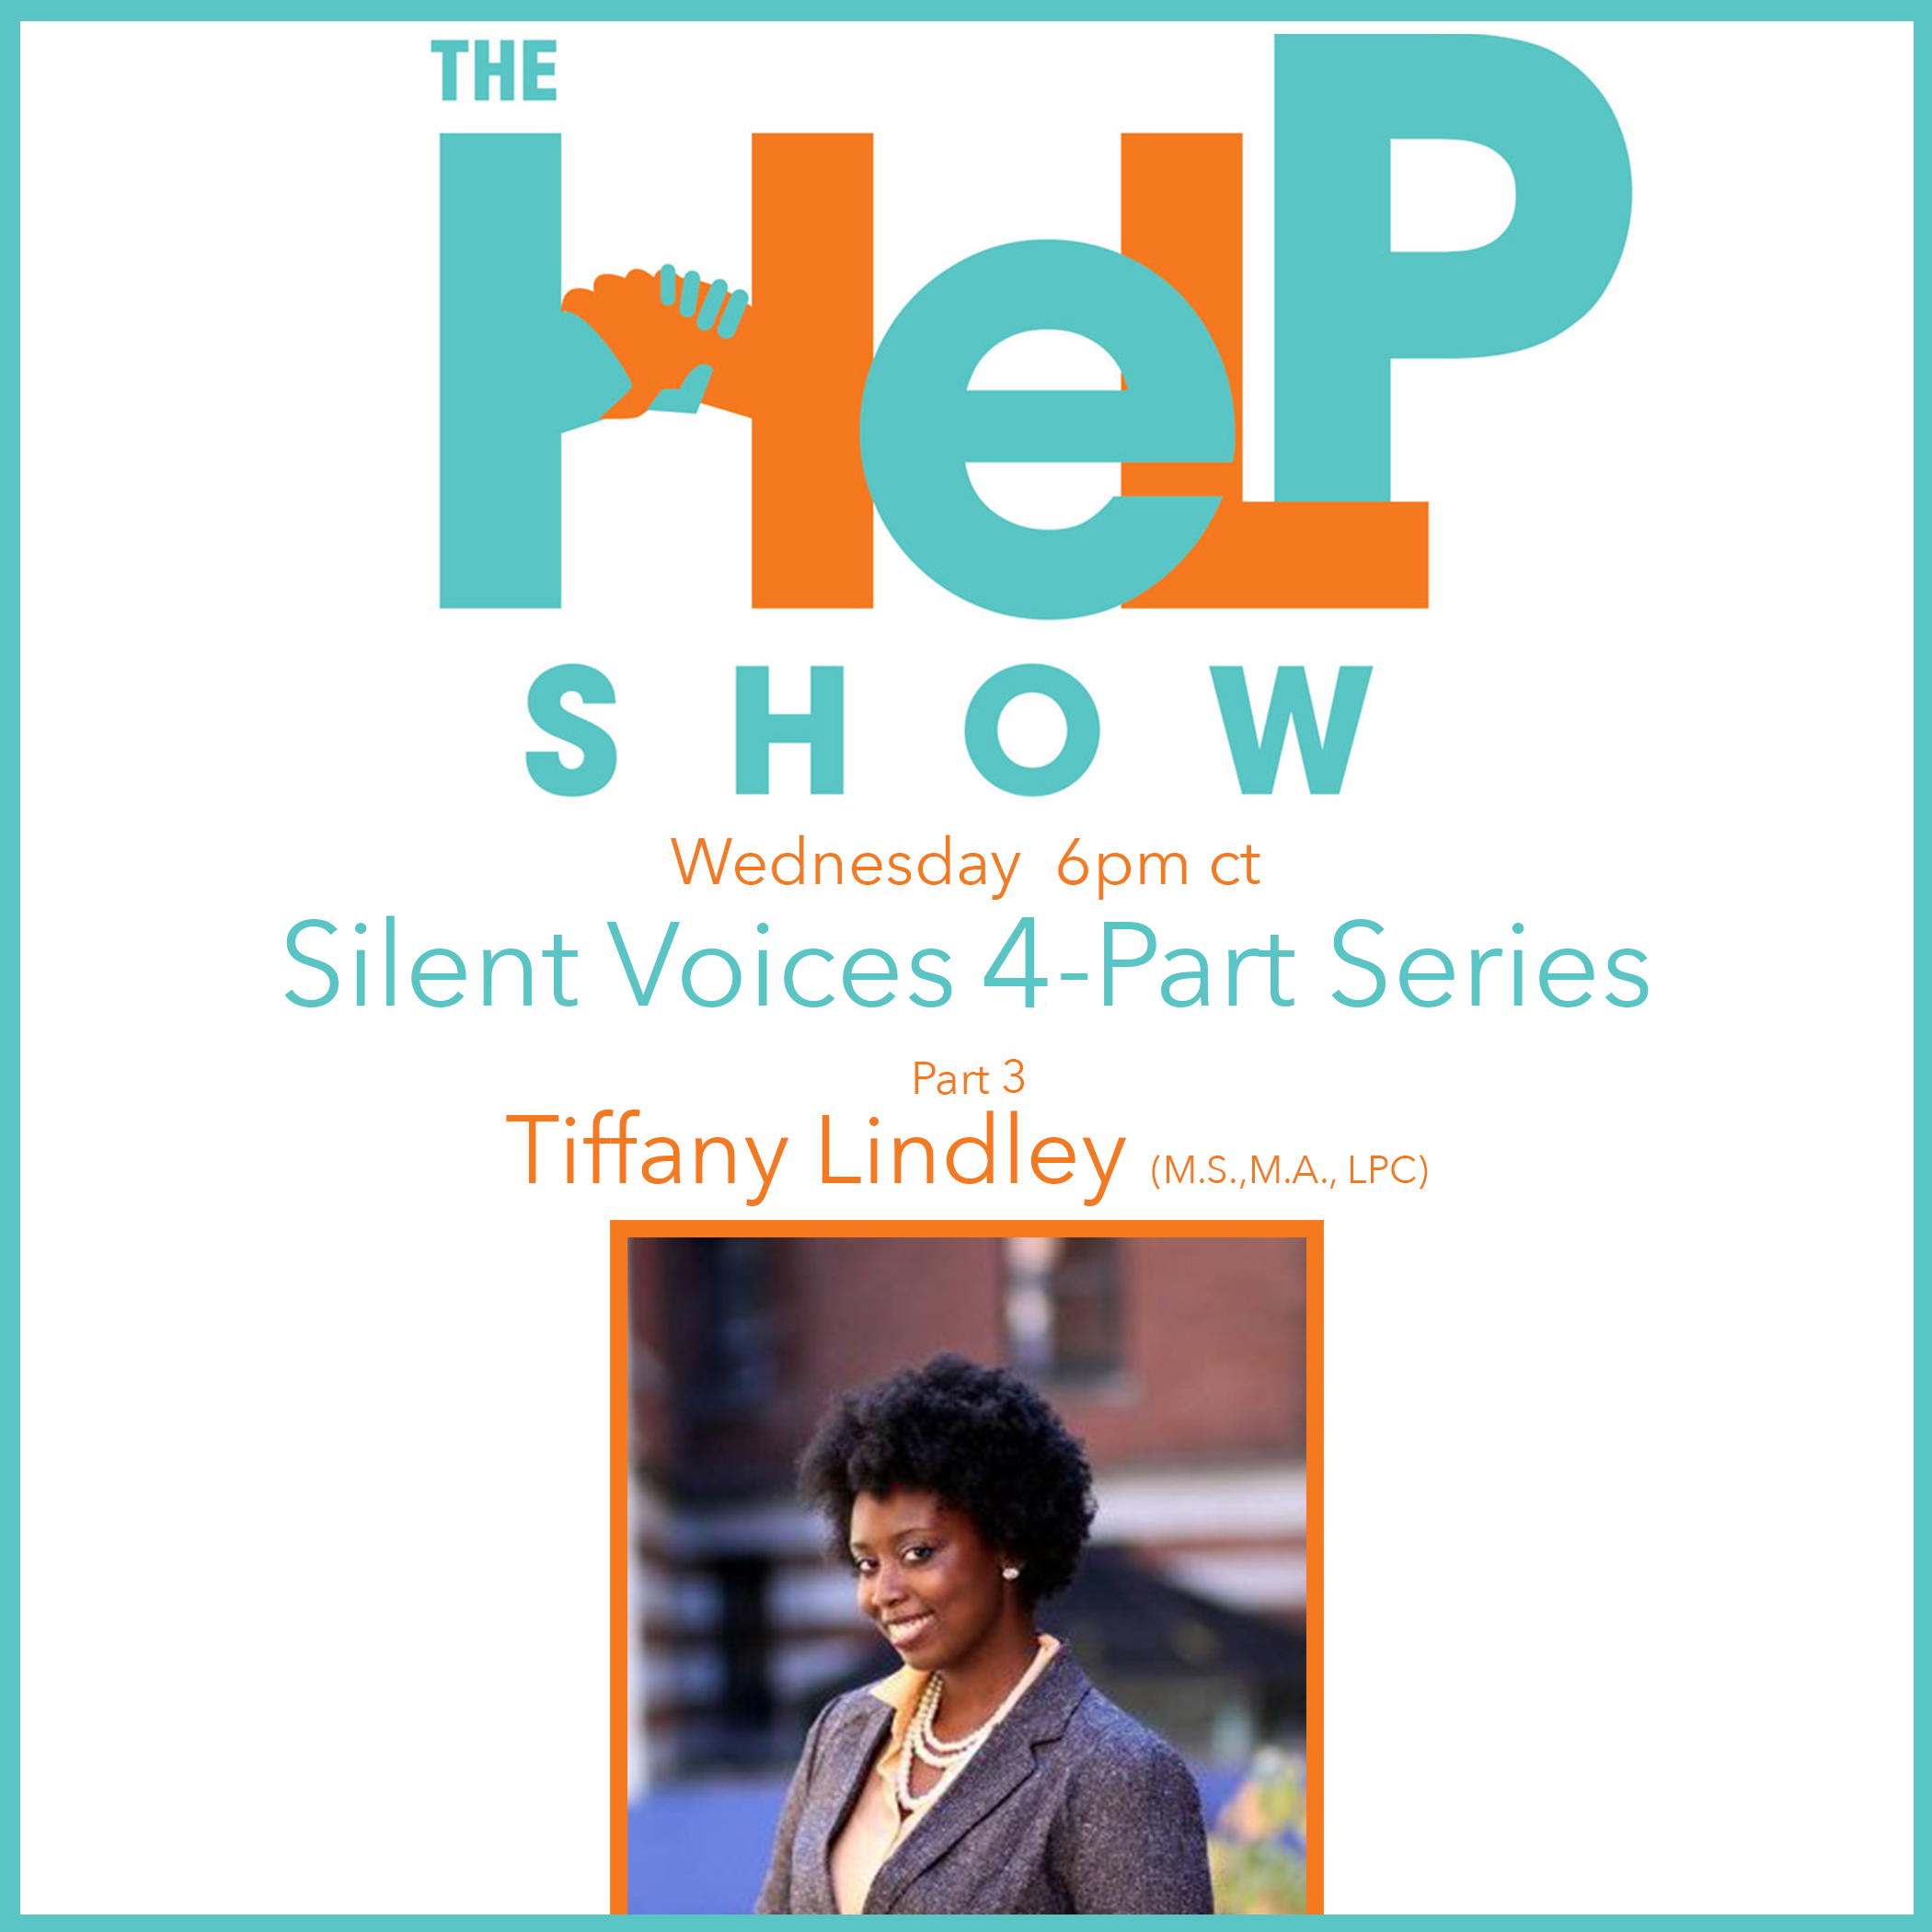 Silent Voice Episode 1: Part Three (With Tiffany Lindley)